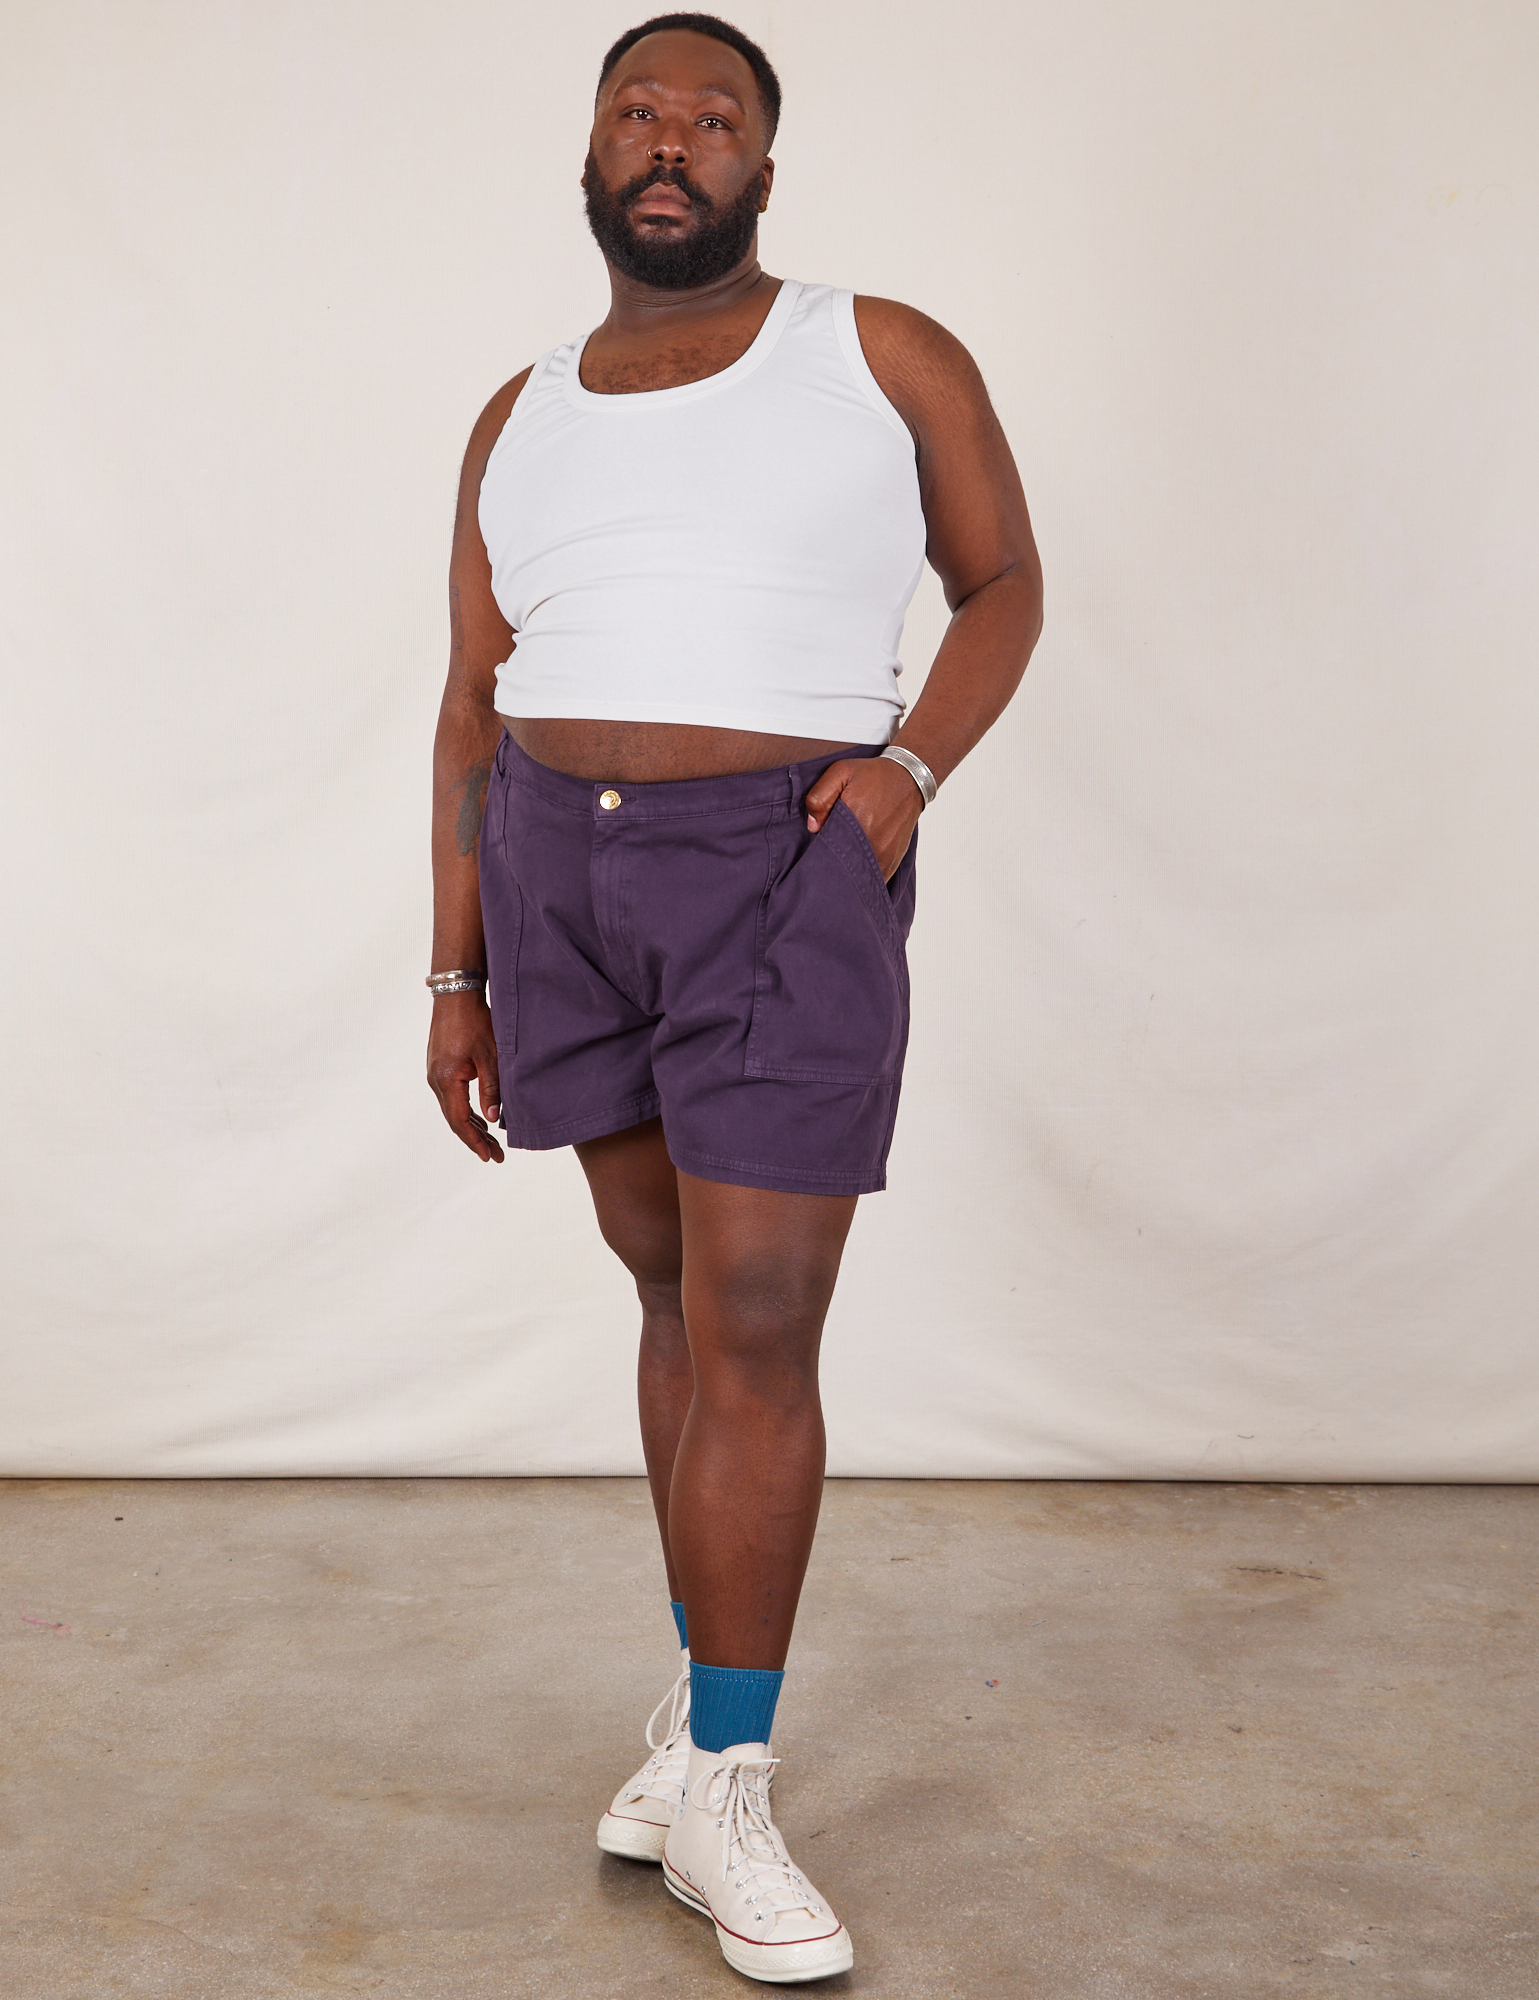 Elijah is 6’0” and wearing 3XL Classic Work Shorts in Nebula Purple paired with Tank Top in vintage tee off-white